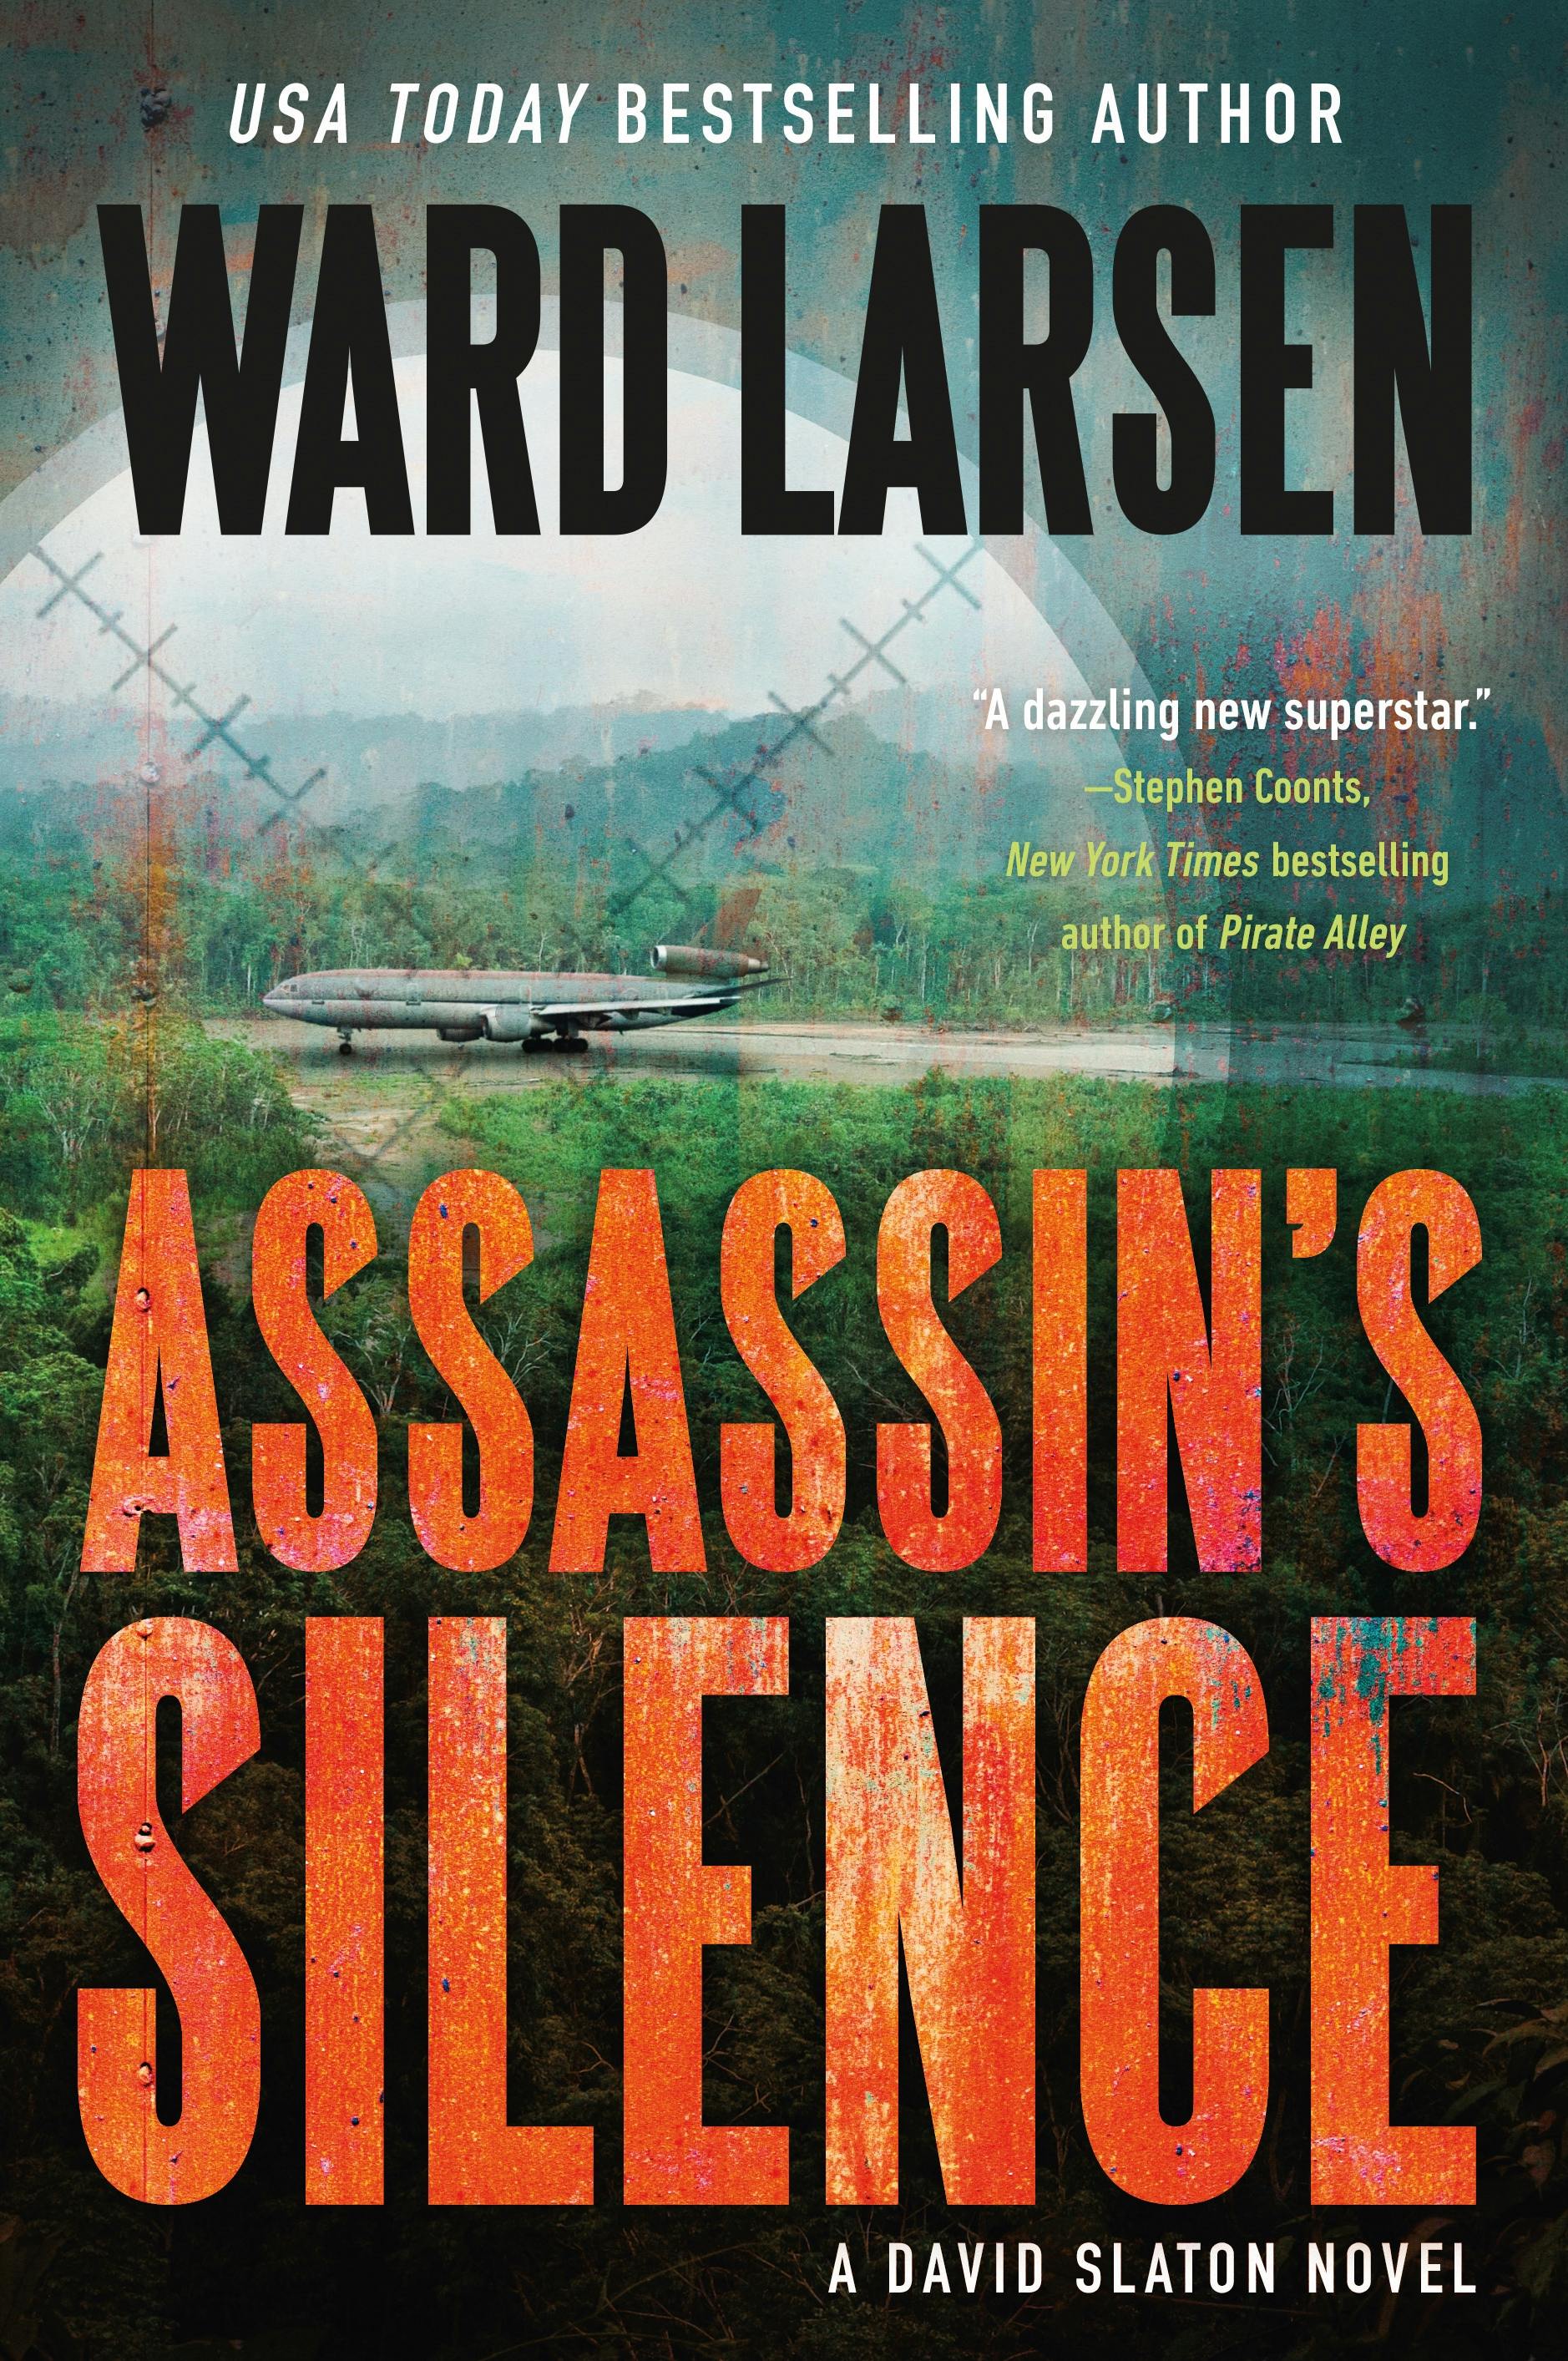 Cover for the book titled as: Assassin's Silence